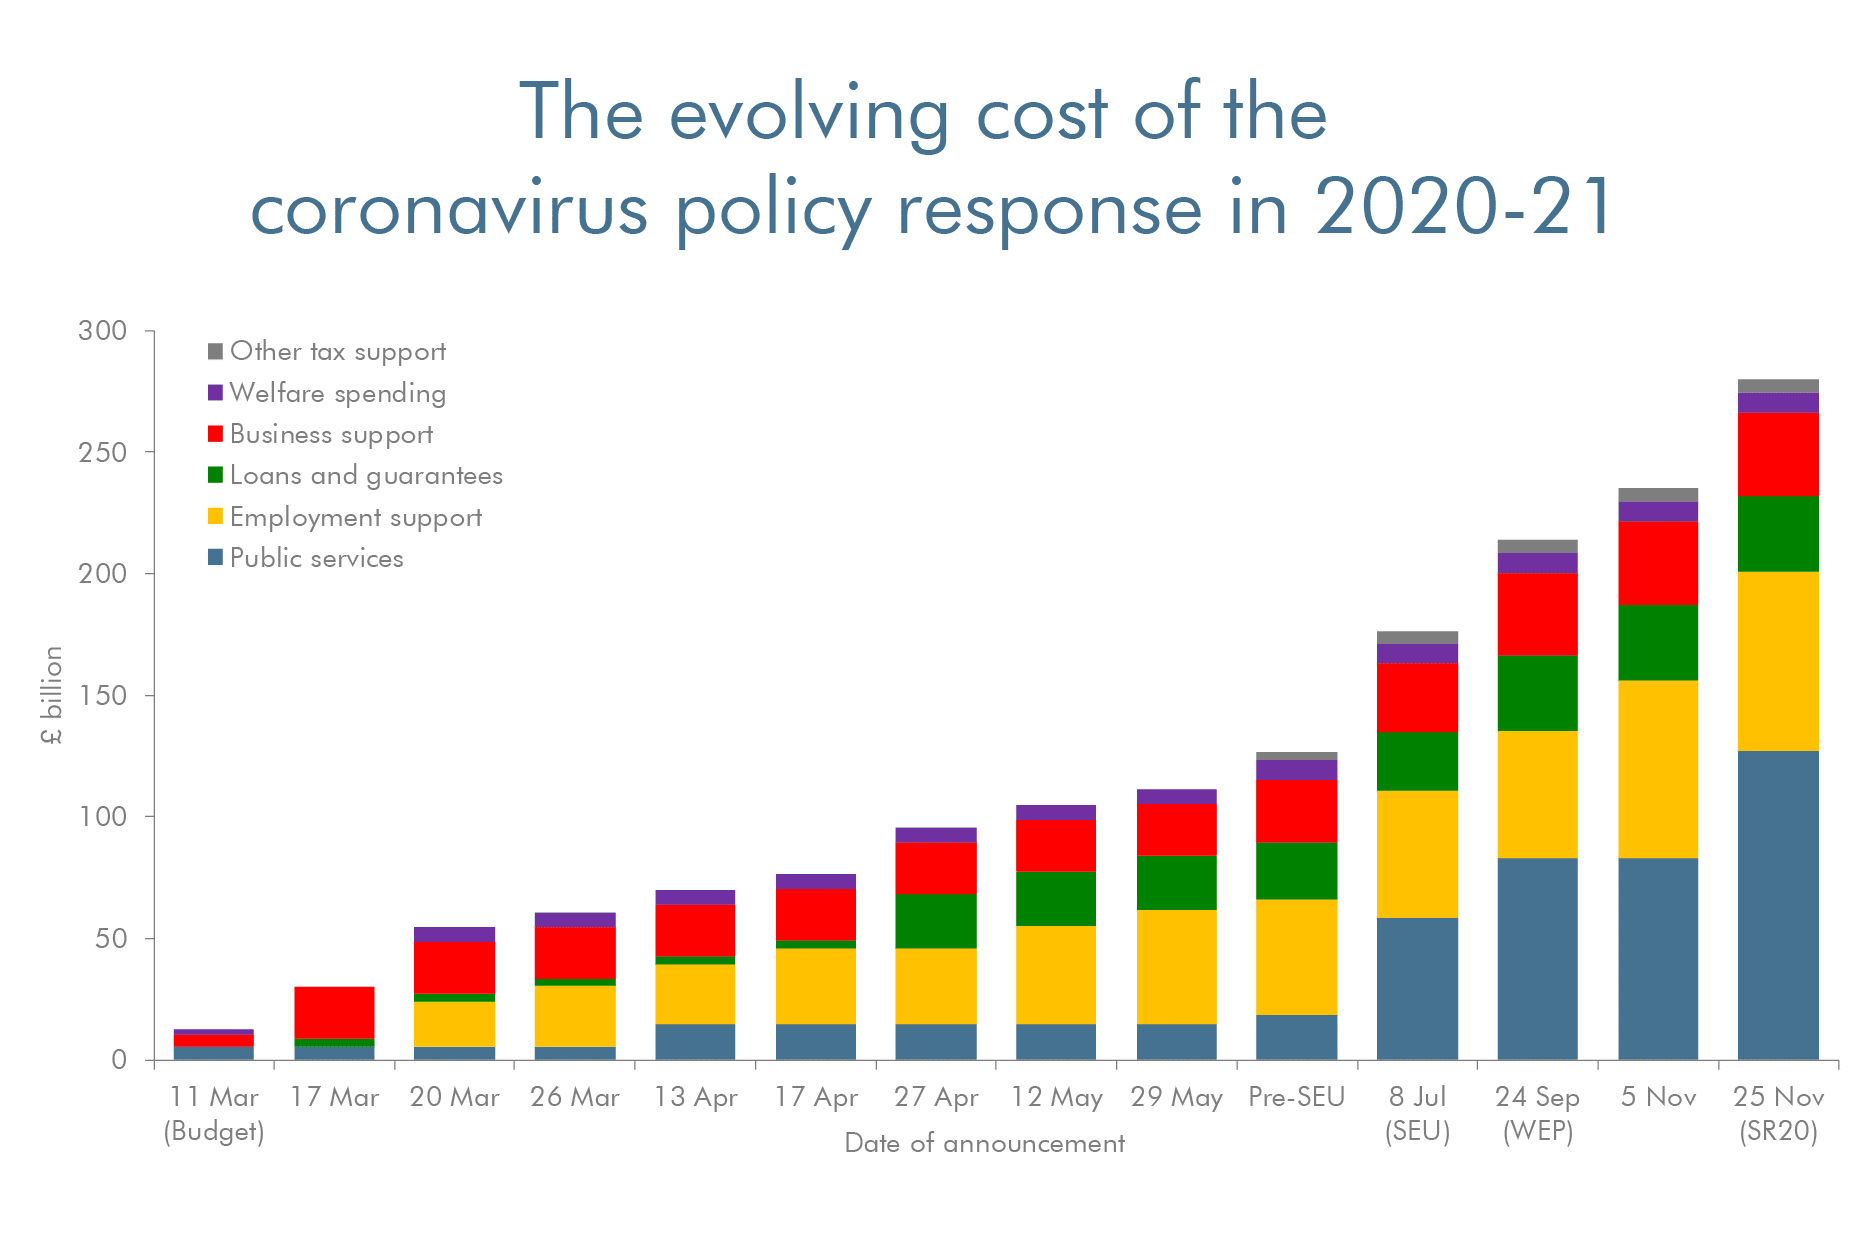 the evolving cost of the coronavirus policy response in 2020-21 bar chart